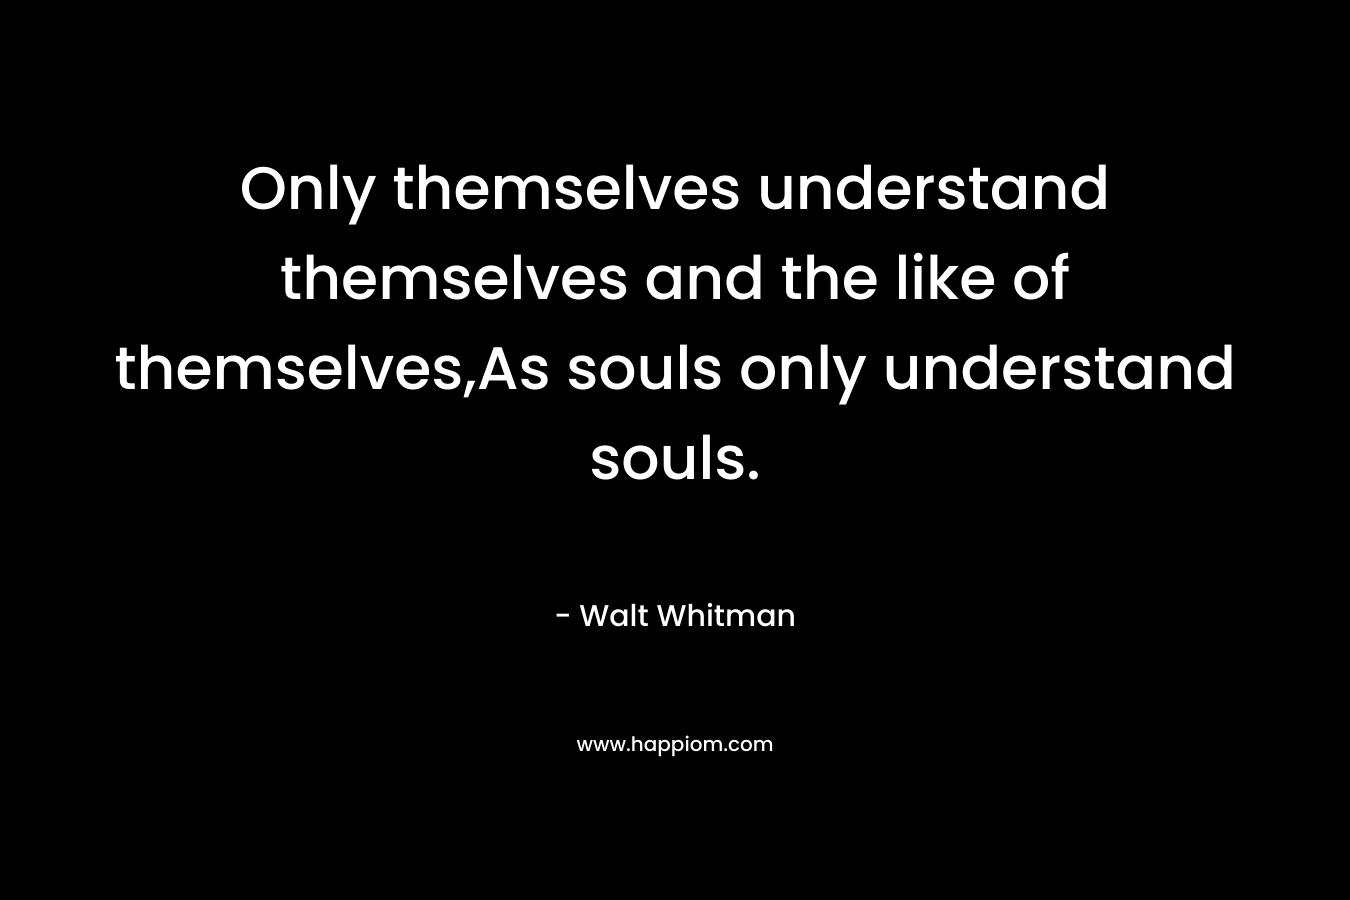 Only themselves understand themselves and the like of themselves,As souls only understand souls.